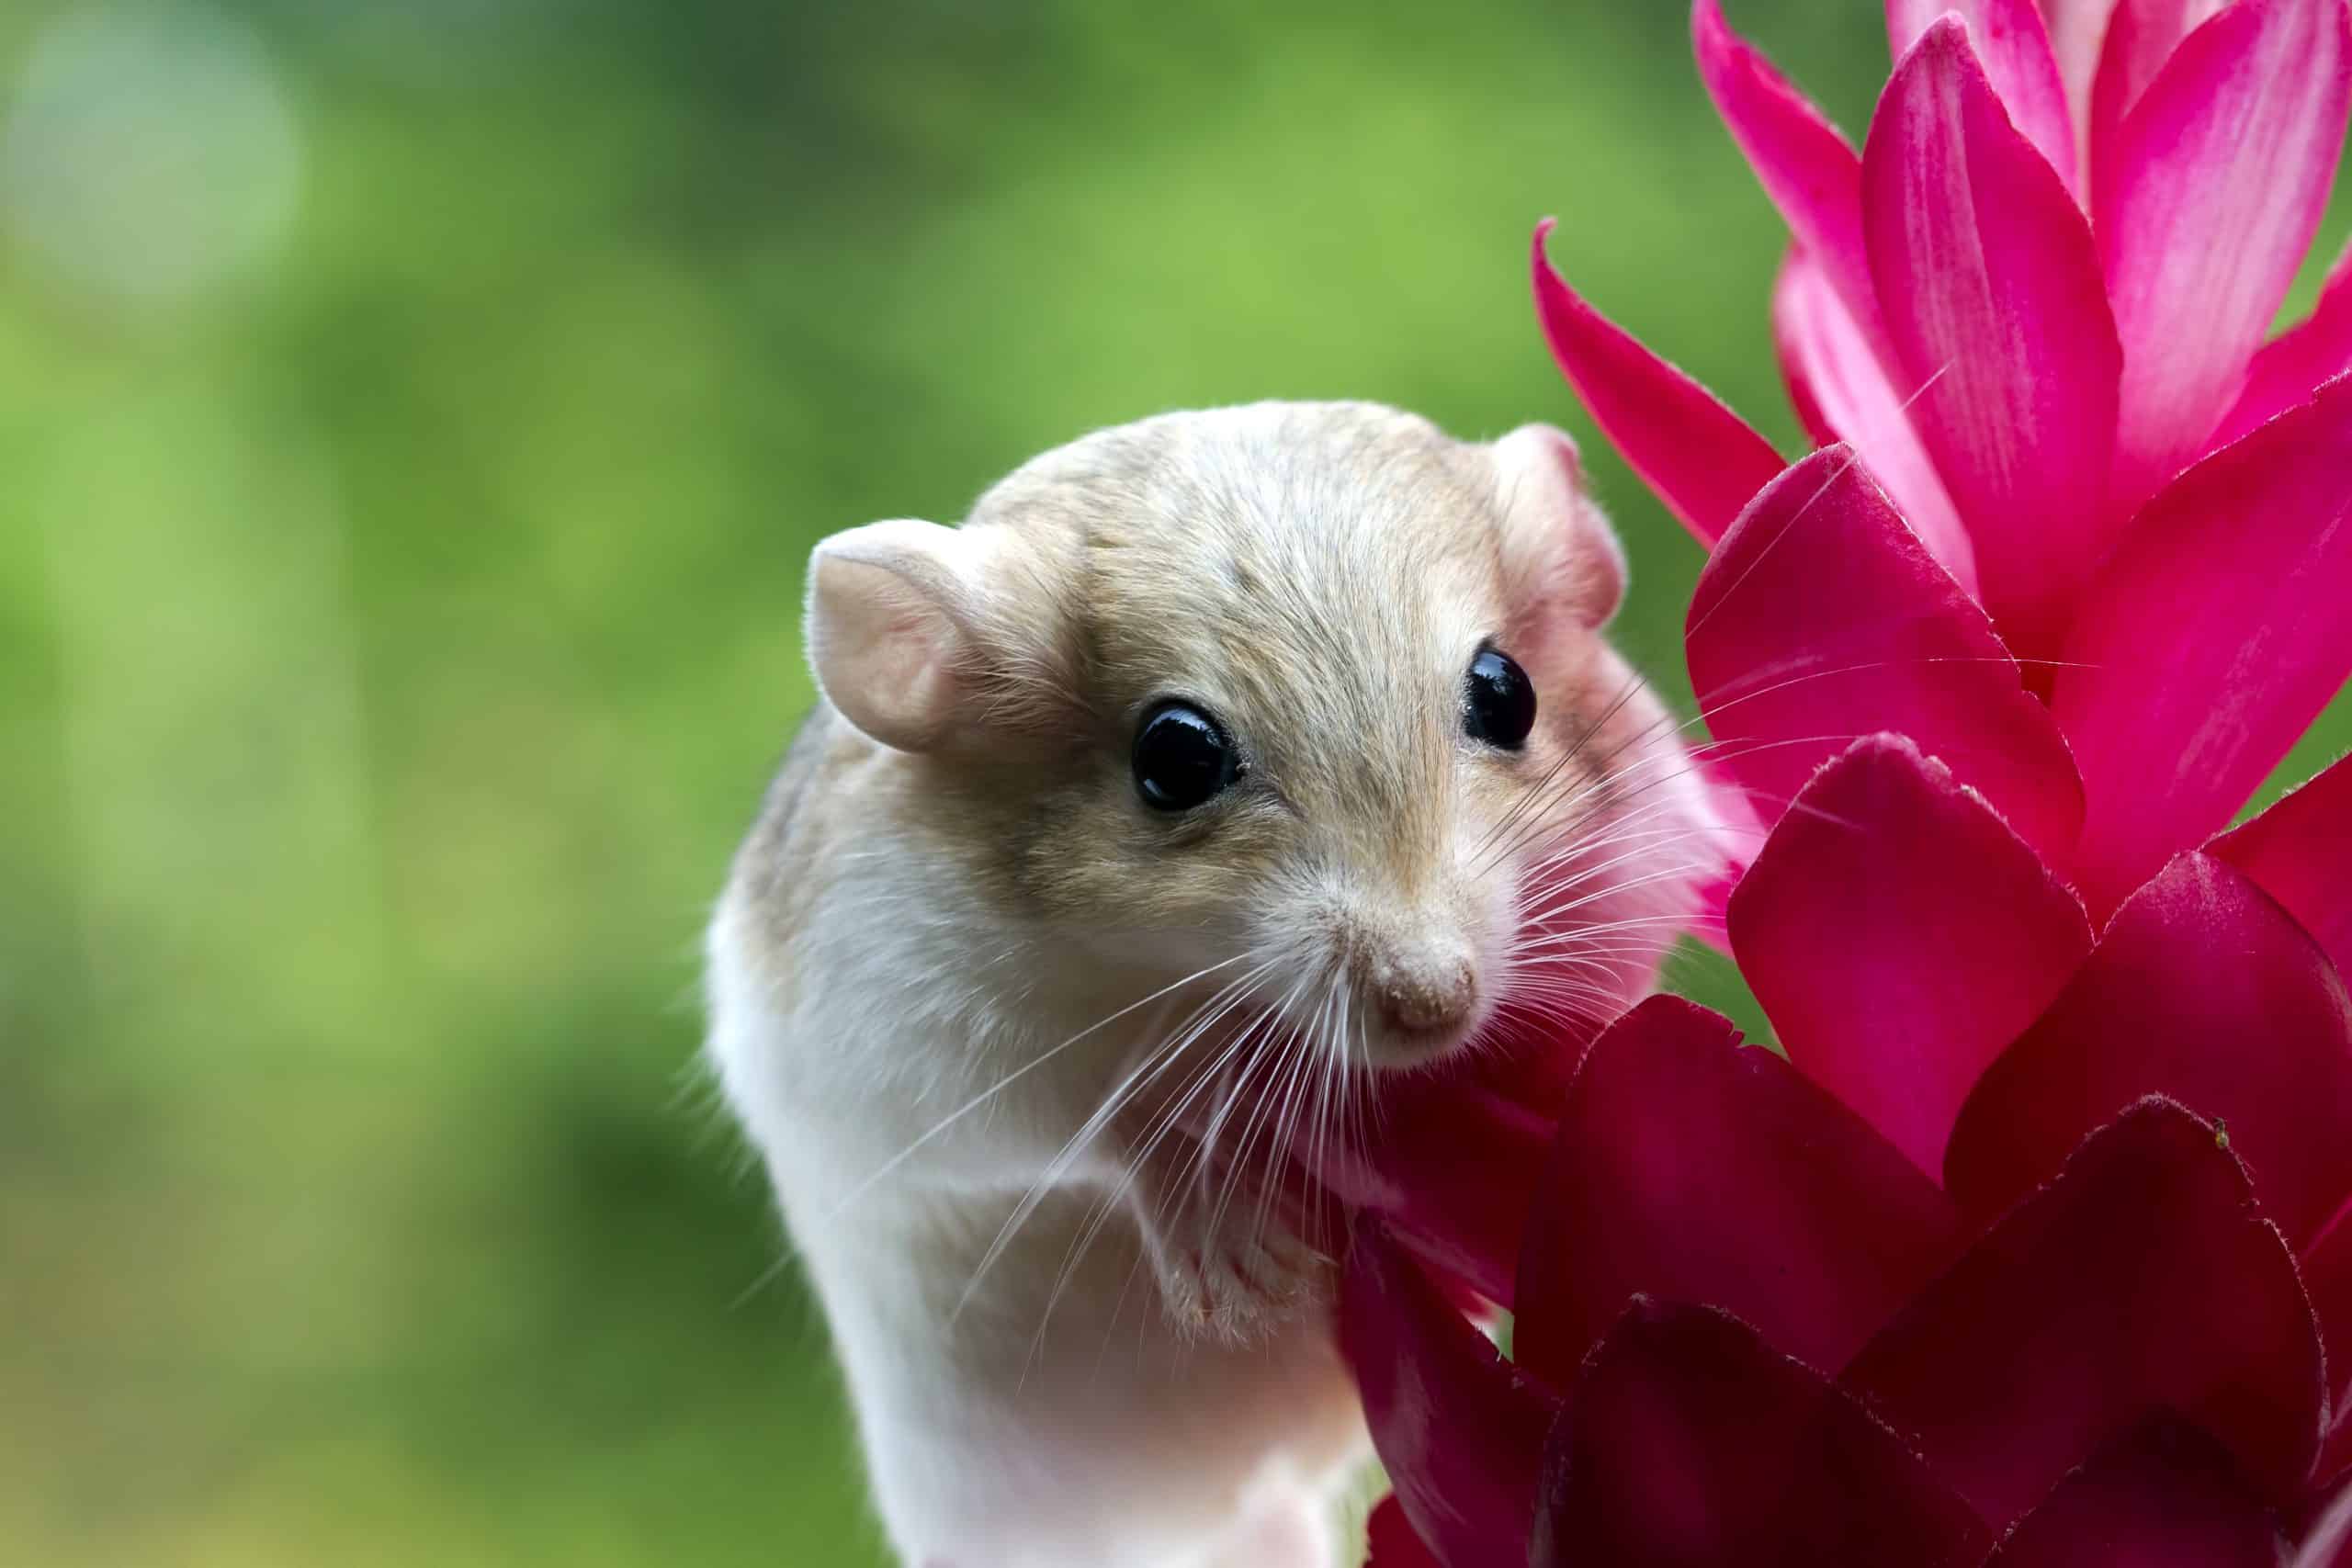 cute gerbil fat tail crawls on red flower garbil fat tail on flower scaled